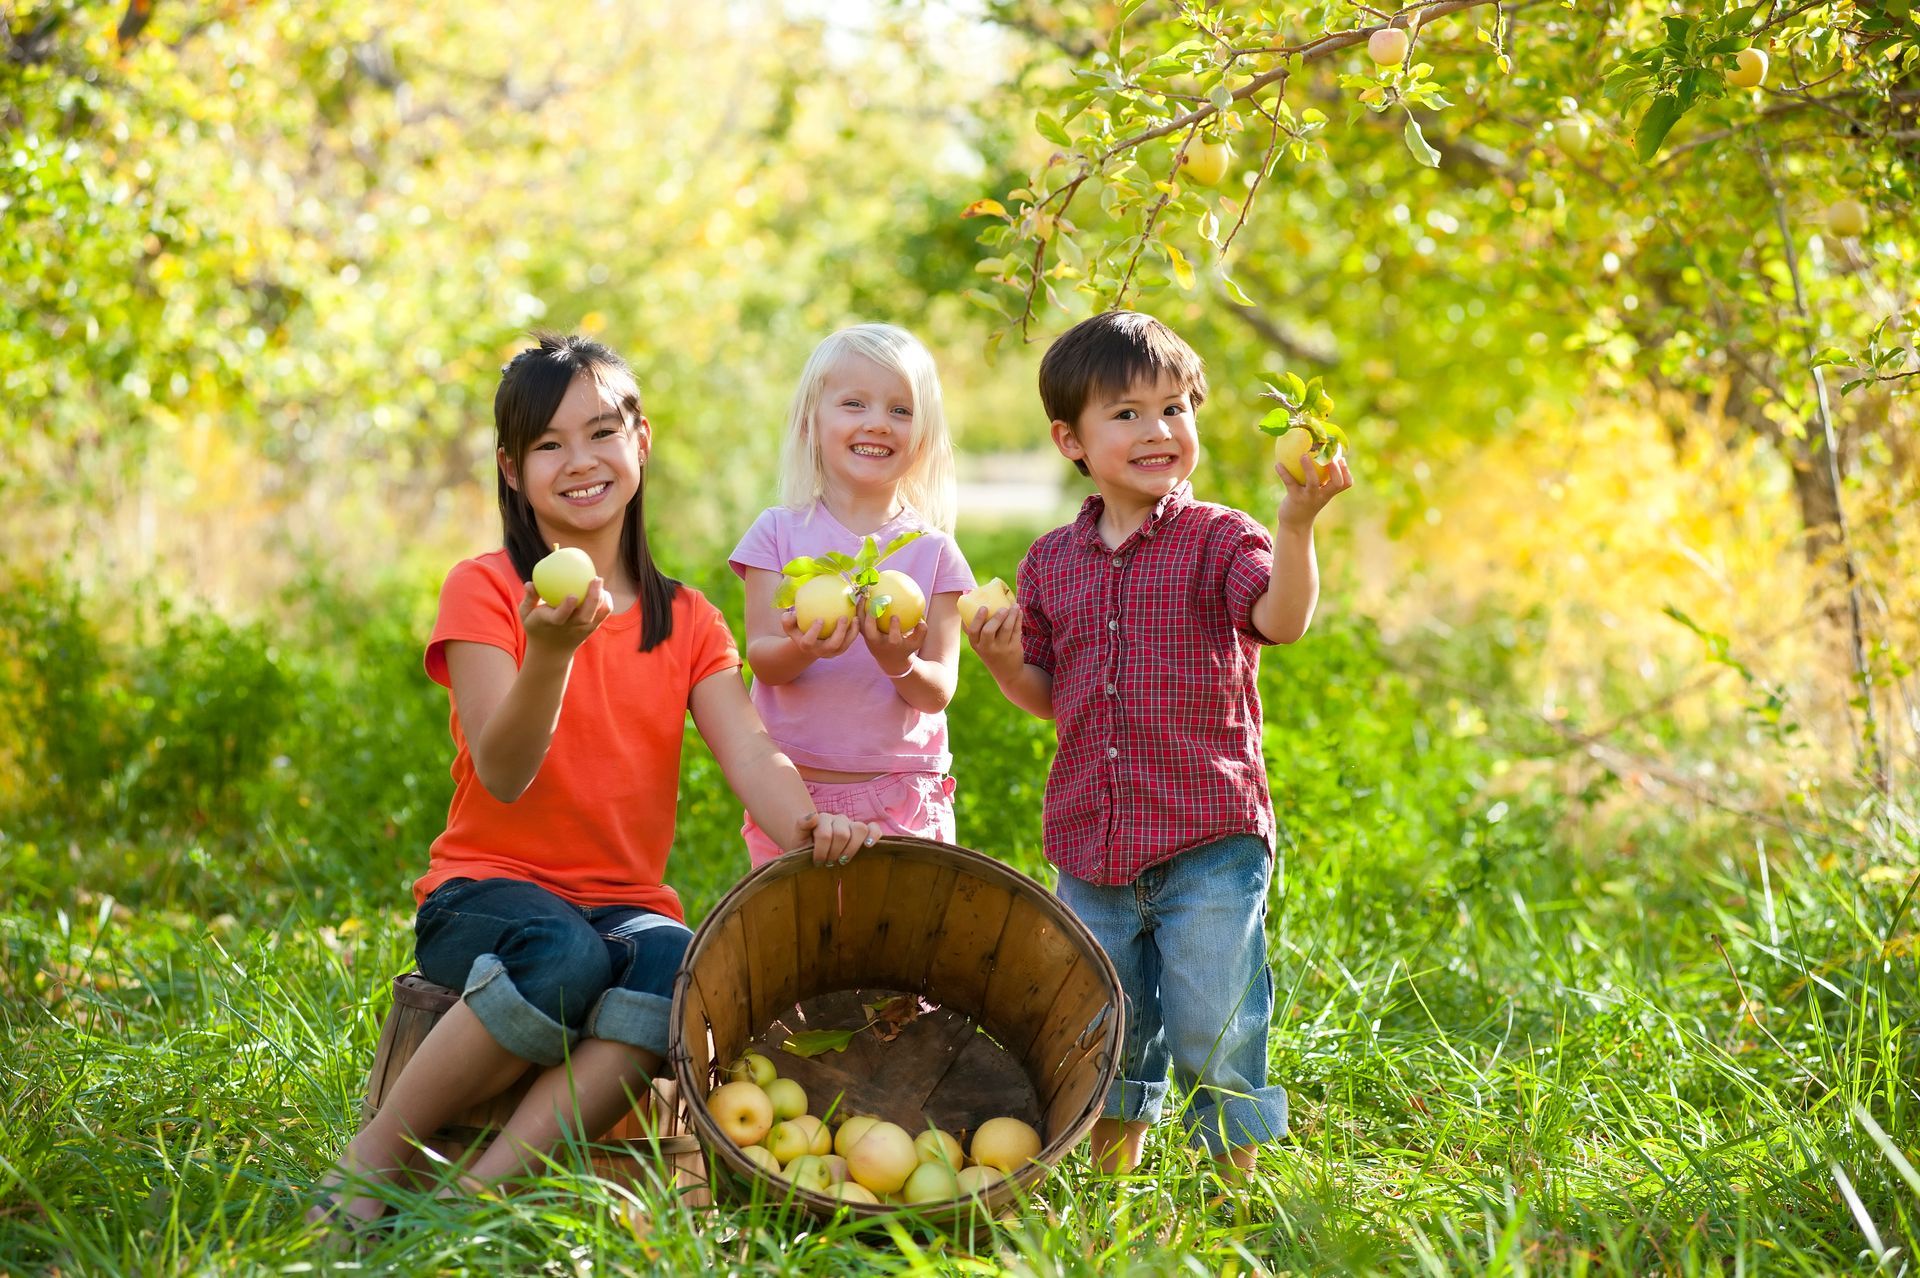 Group of three children holding up green apples from a large basket of apples